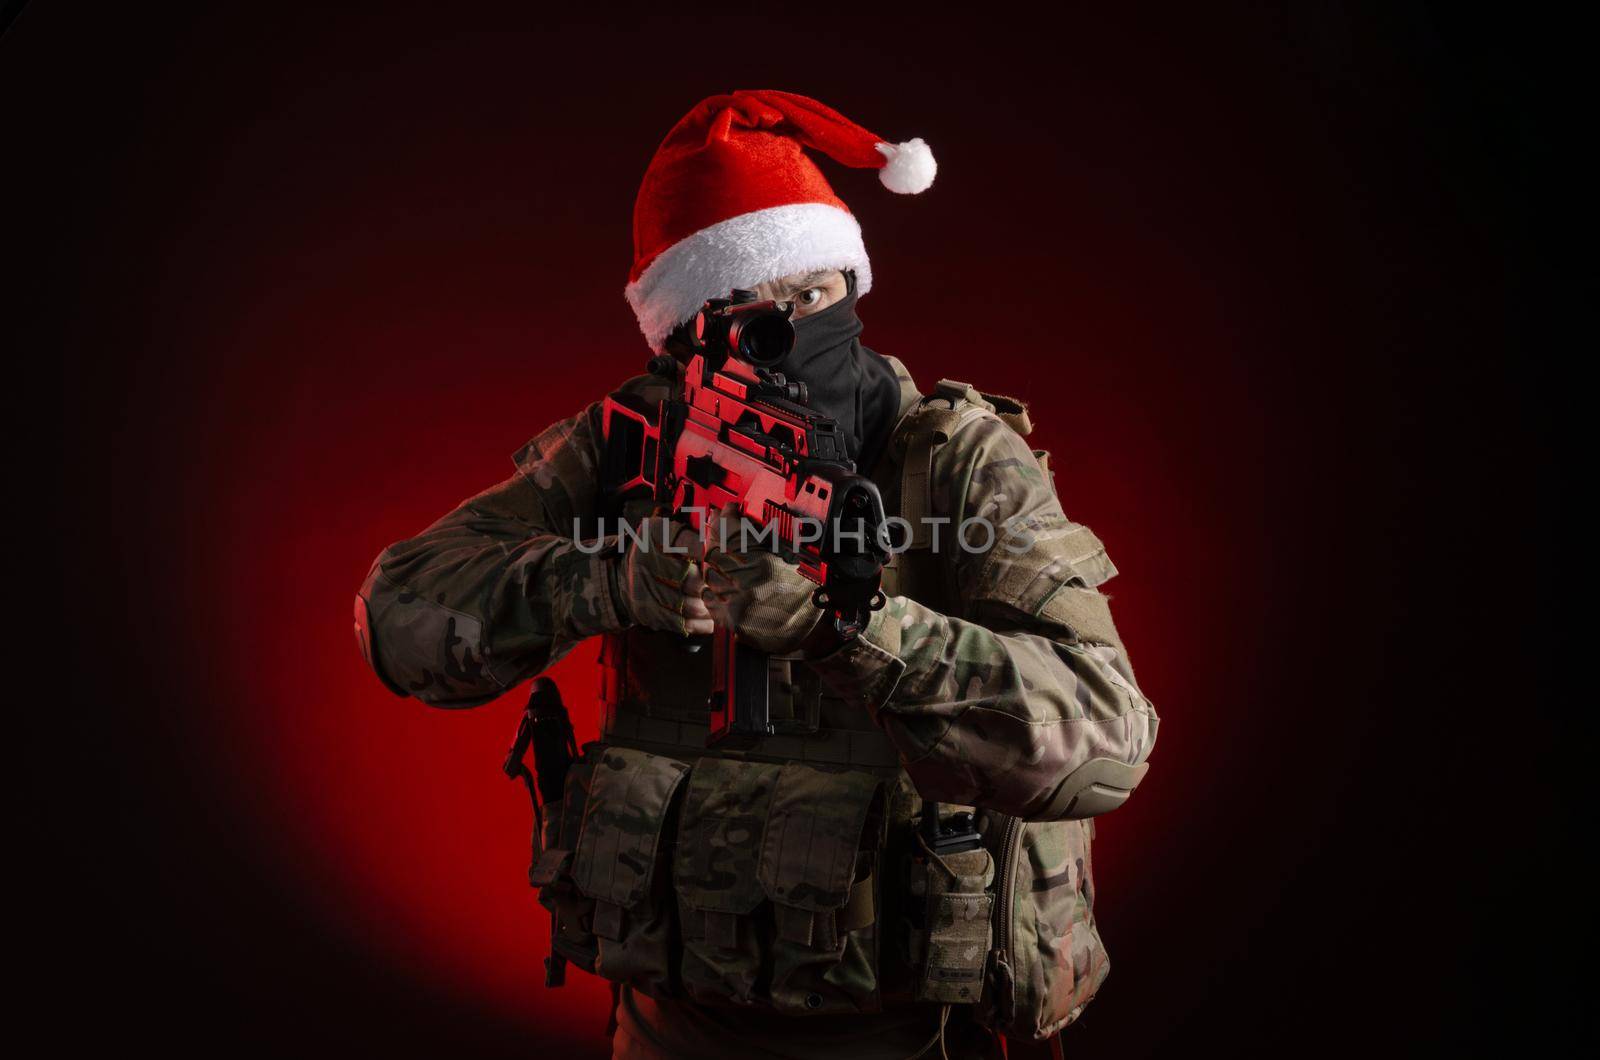 the man in a military uniform with a gun and a Santa Claus hat